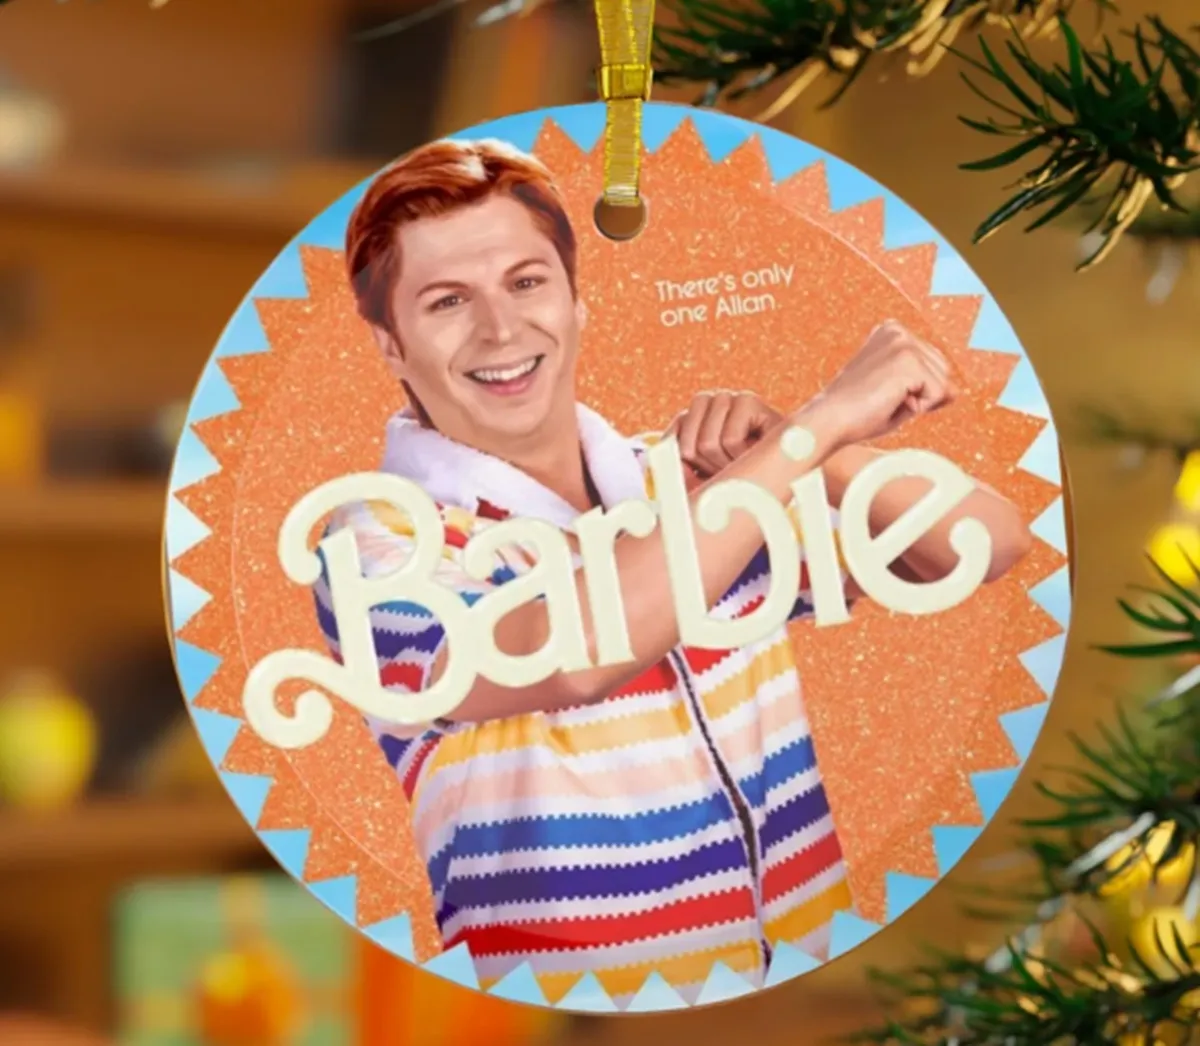 Allan (Michael Cera) from the Barbie movie on an ornament